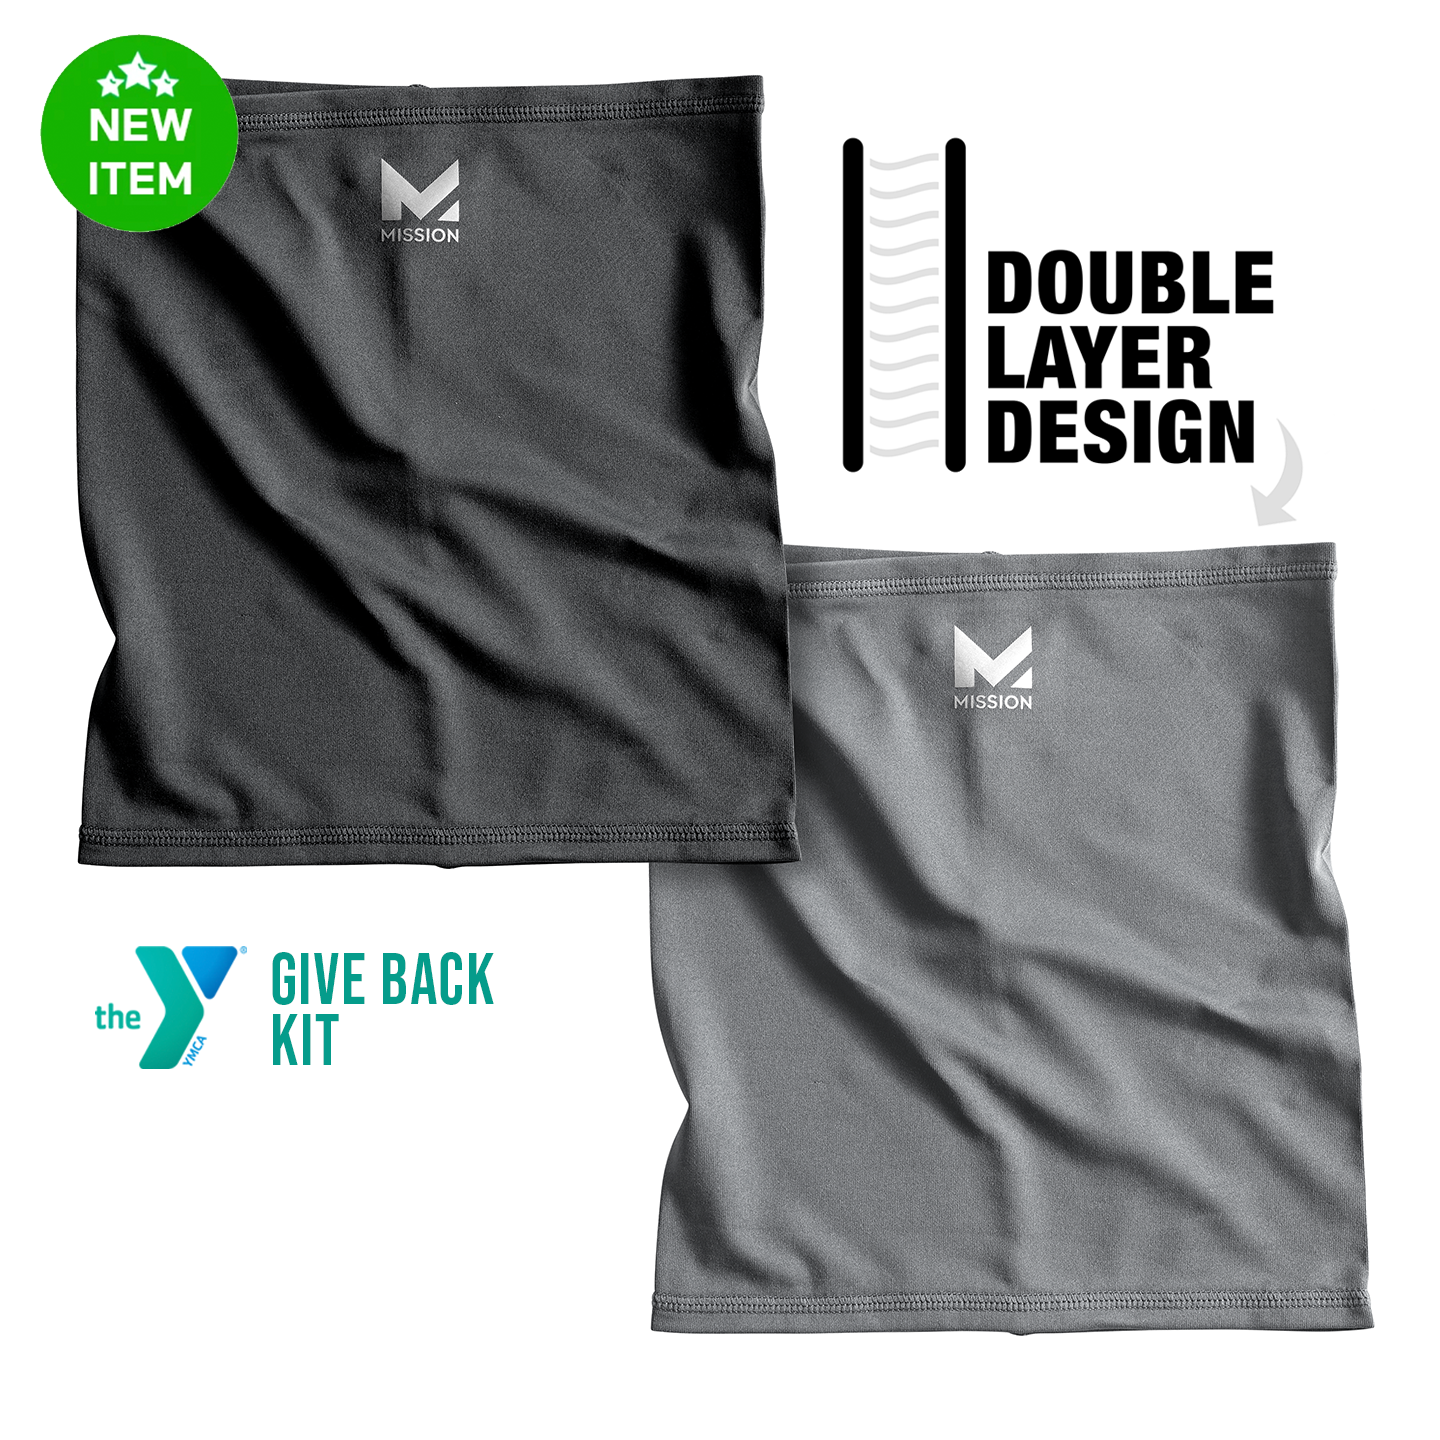 YMCA GIVE BACK KIT | Multi-Layer Youth 6-in-1 Gaiter | 2-PACK  MISSION Black and Charcoal  